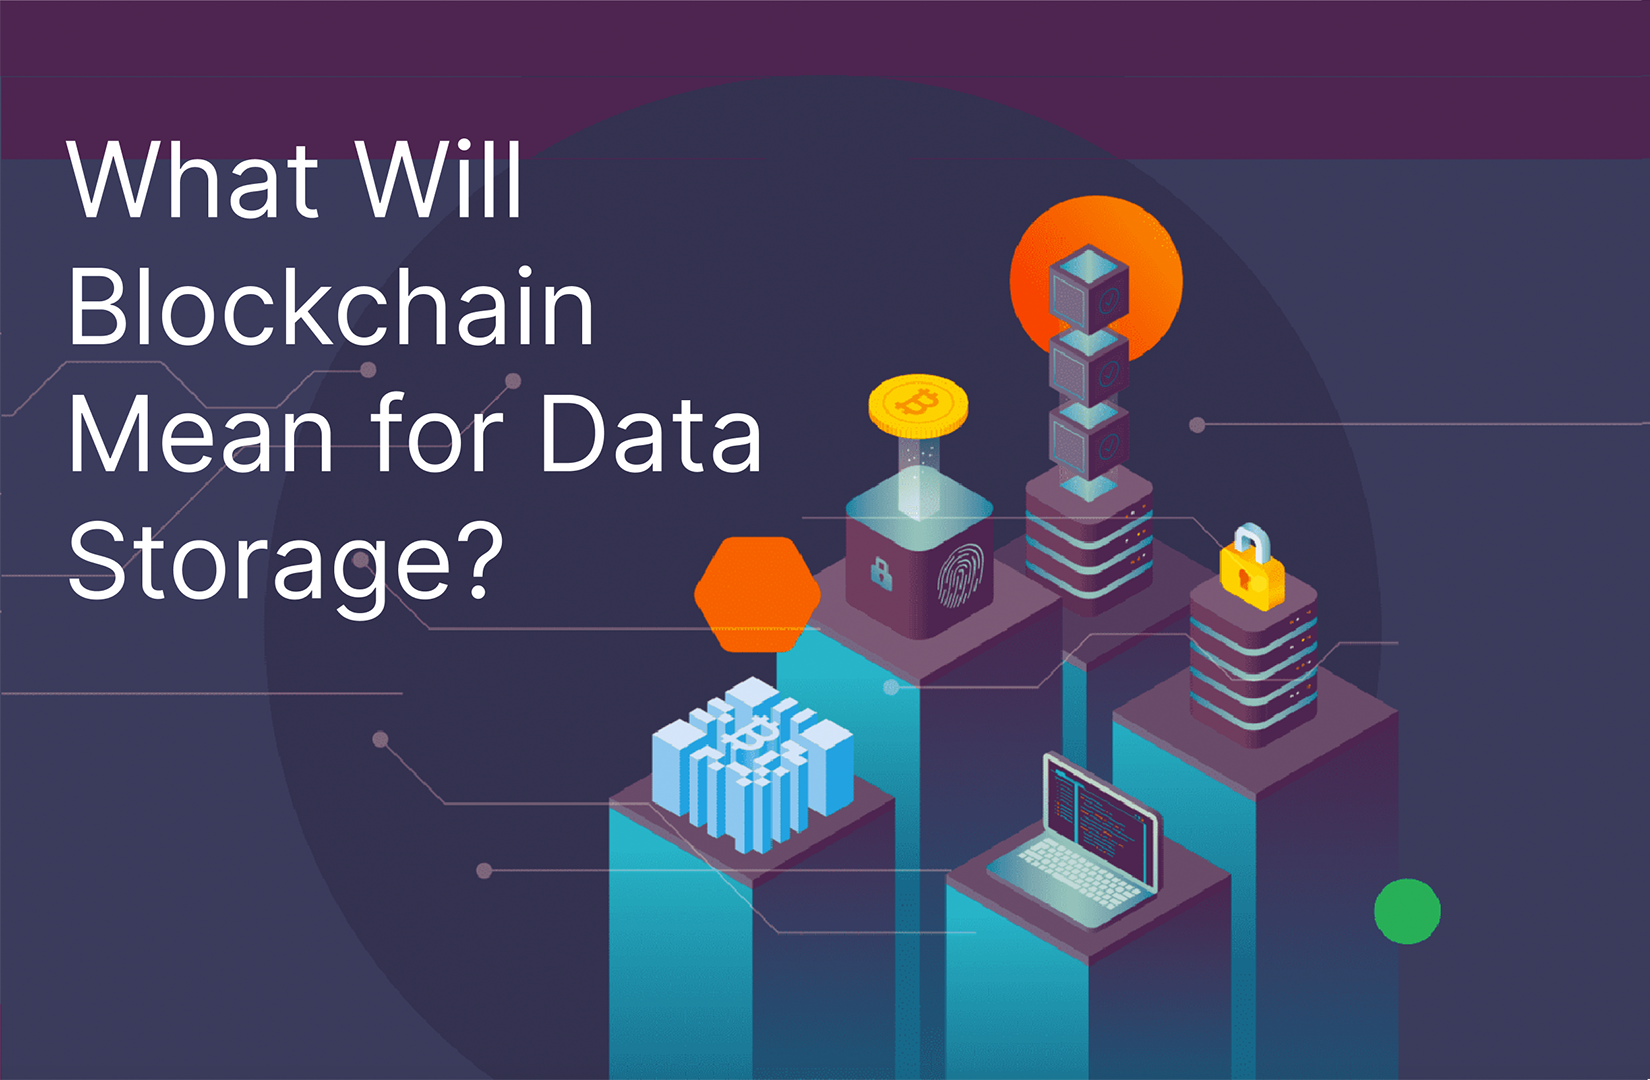 What is the difference between a database and blockchain